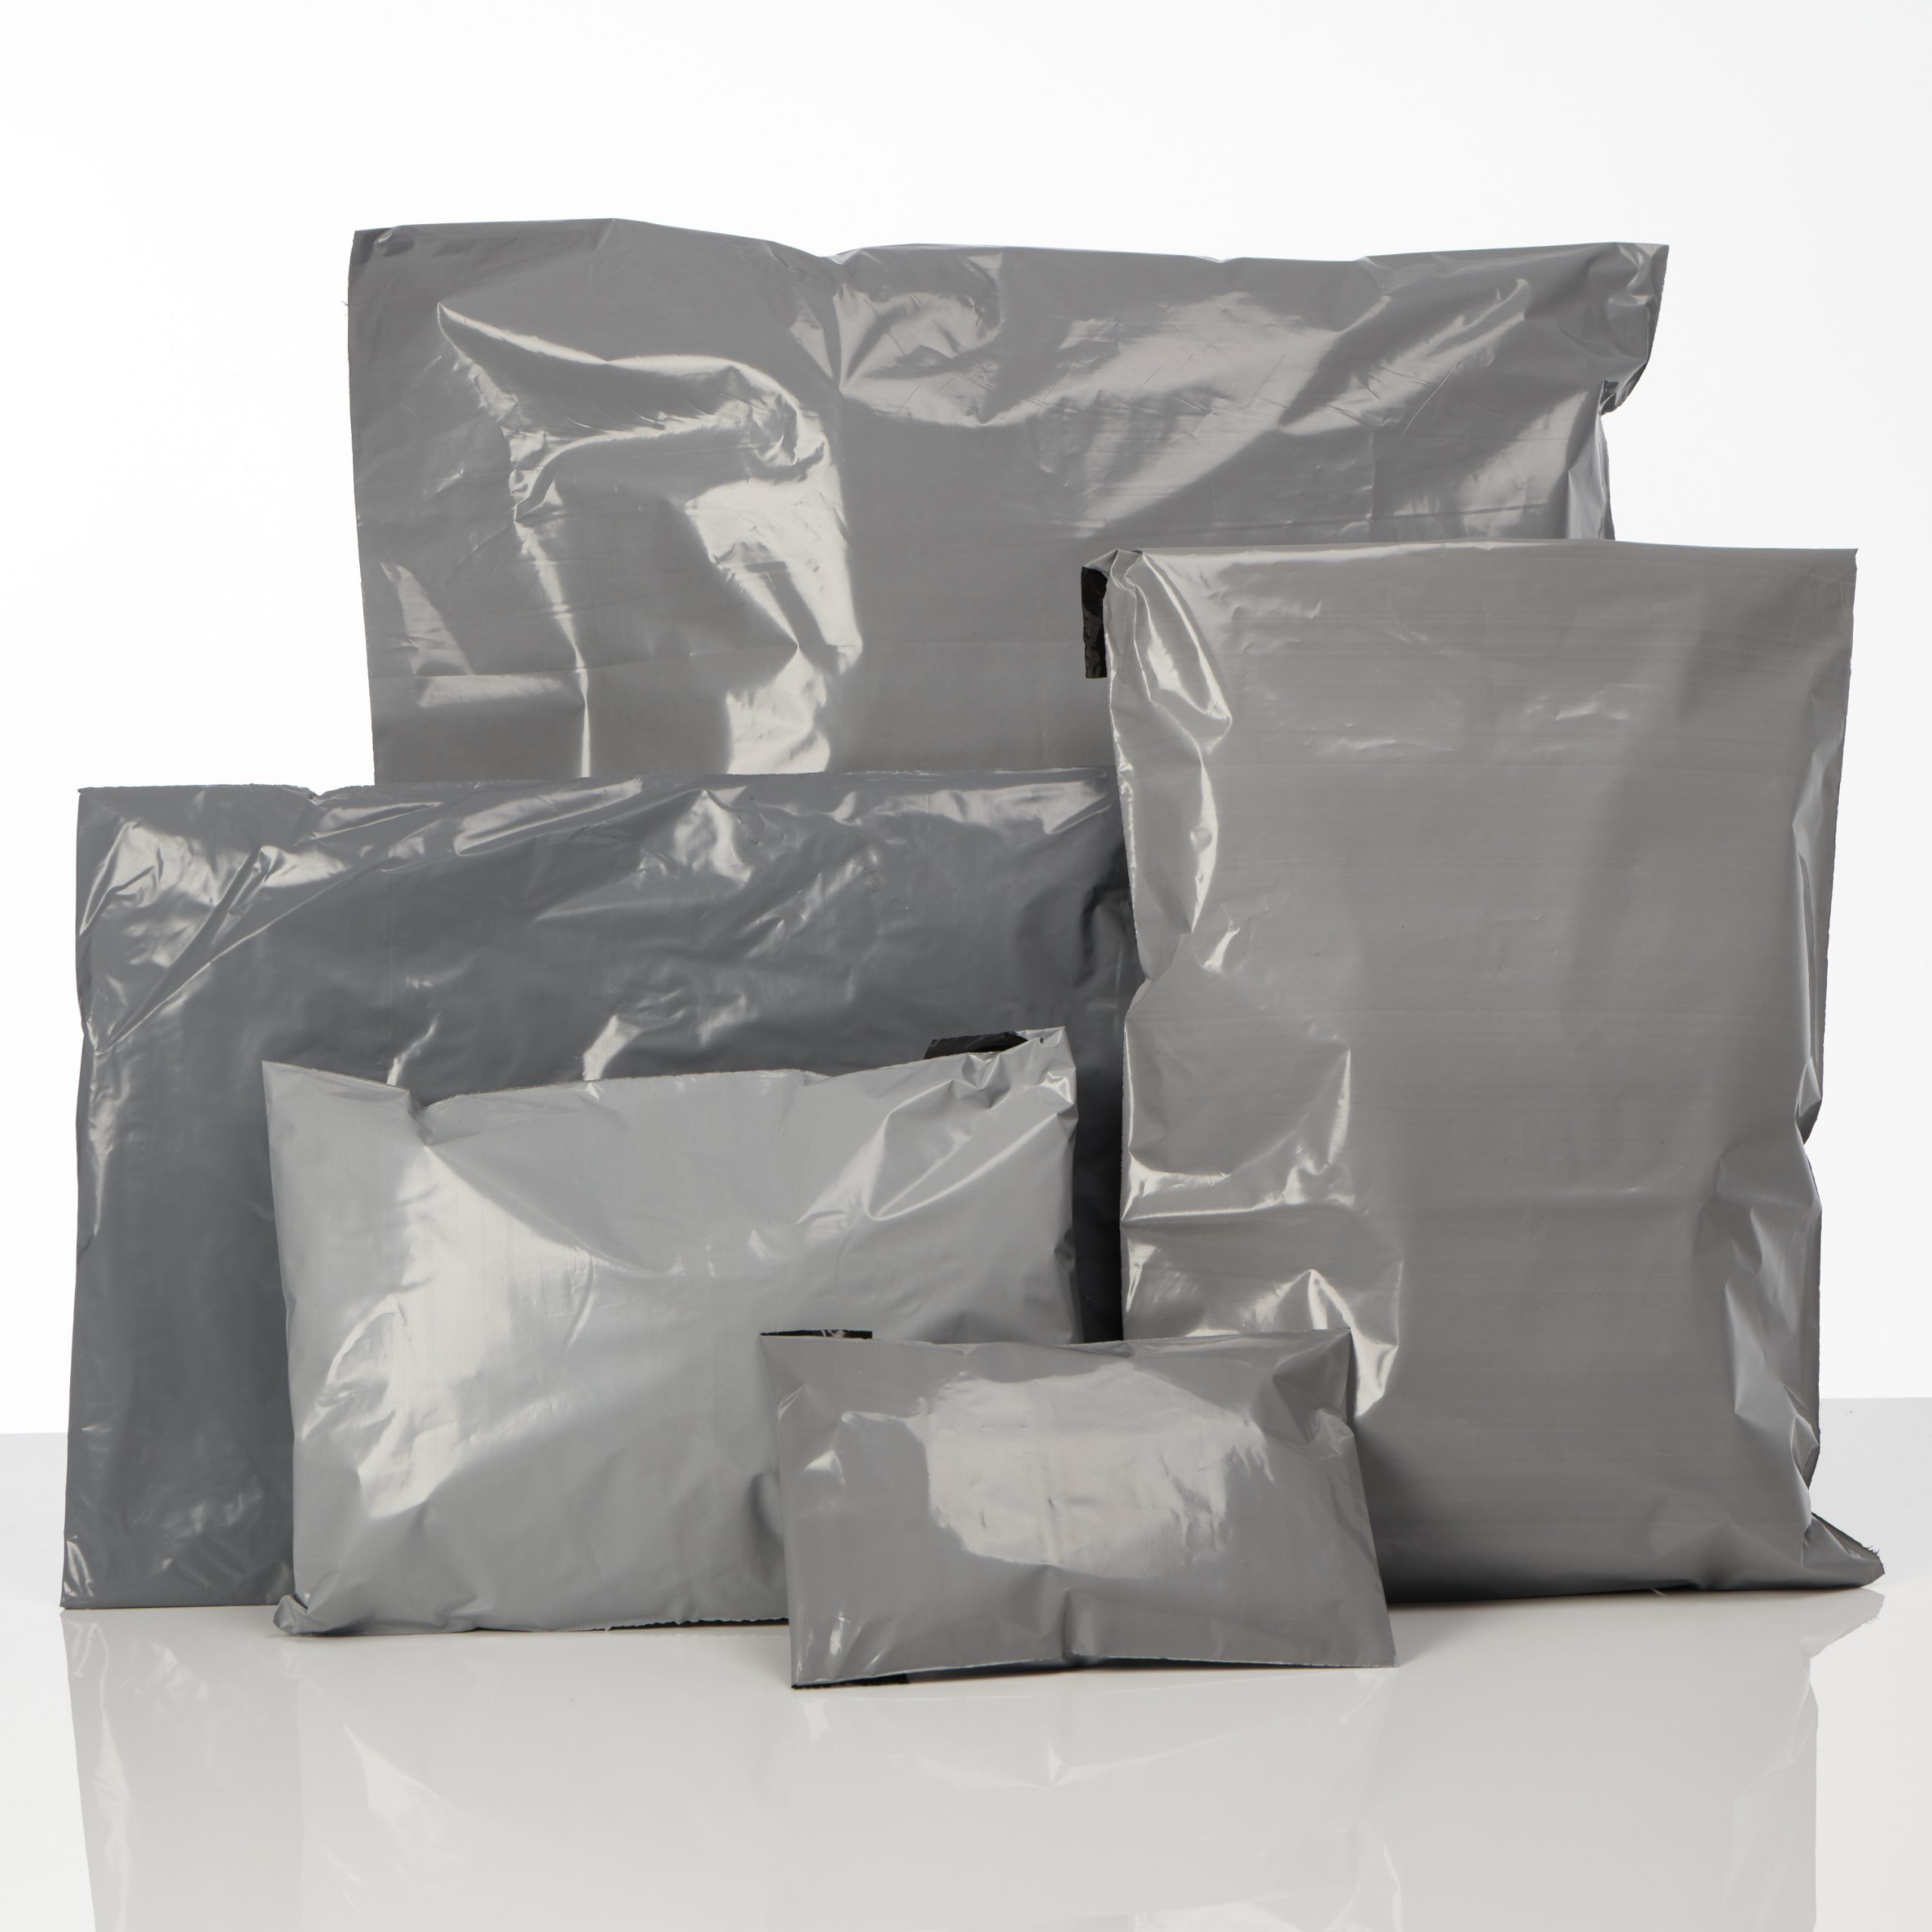 9" x 12" STRONG POLY MAILING POSTAGE POSTAL QUALITY SELF SEAL GREY MAILING BAGS 